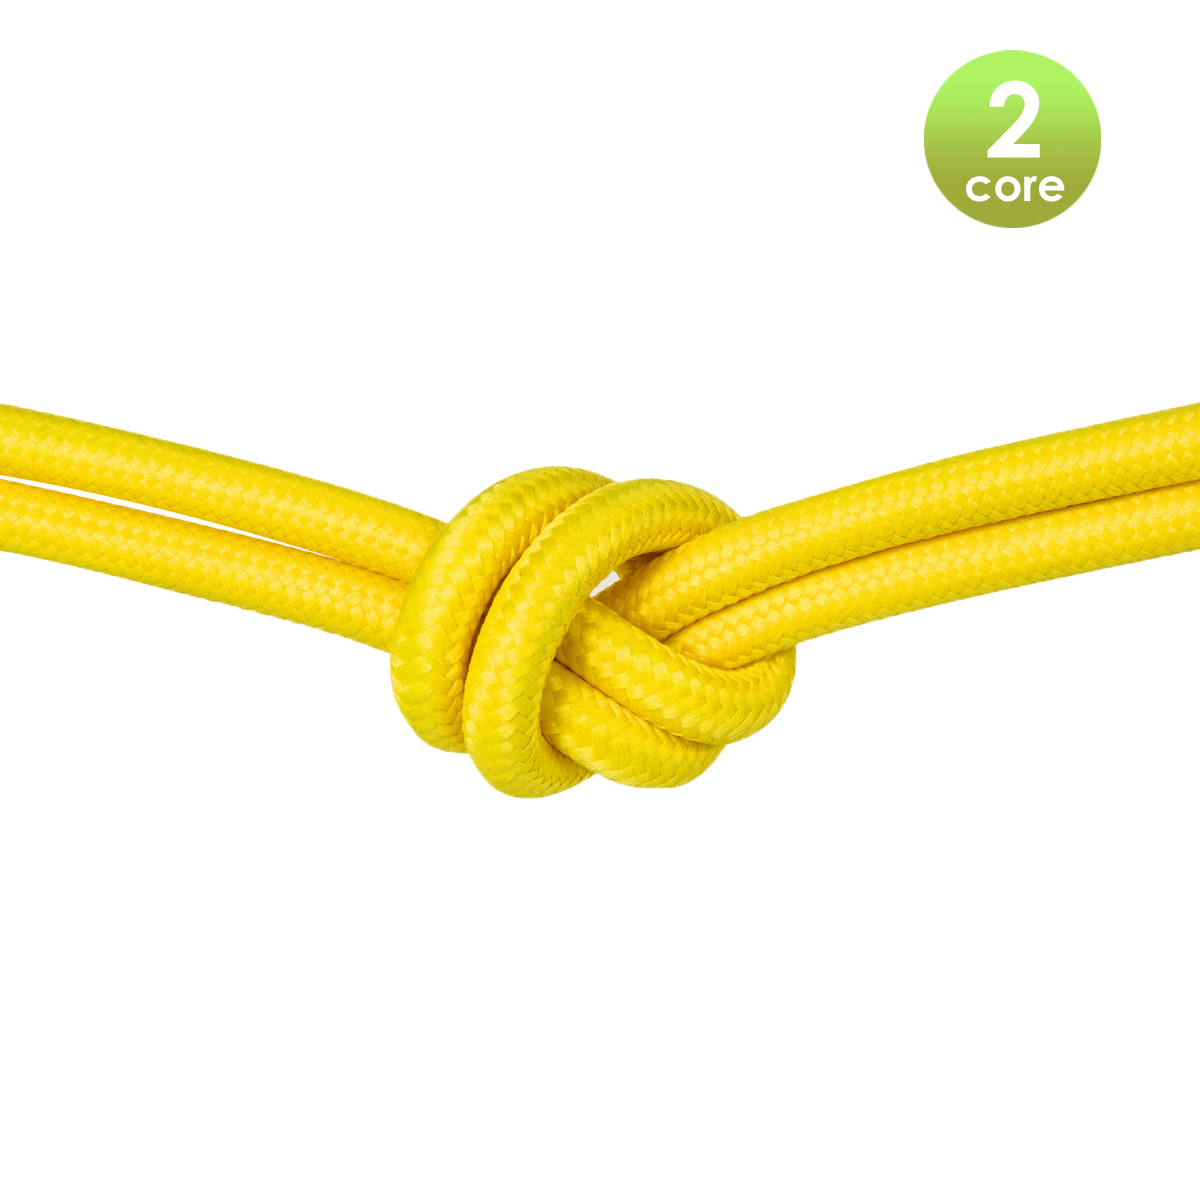 Tangla lighting - TLCB01002YL - Fabric cable 2 core - in maize yellow